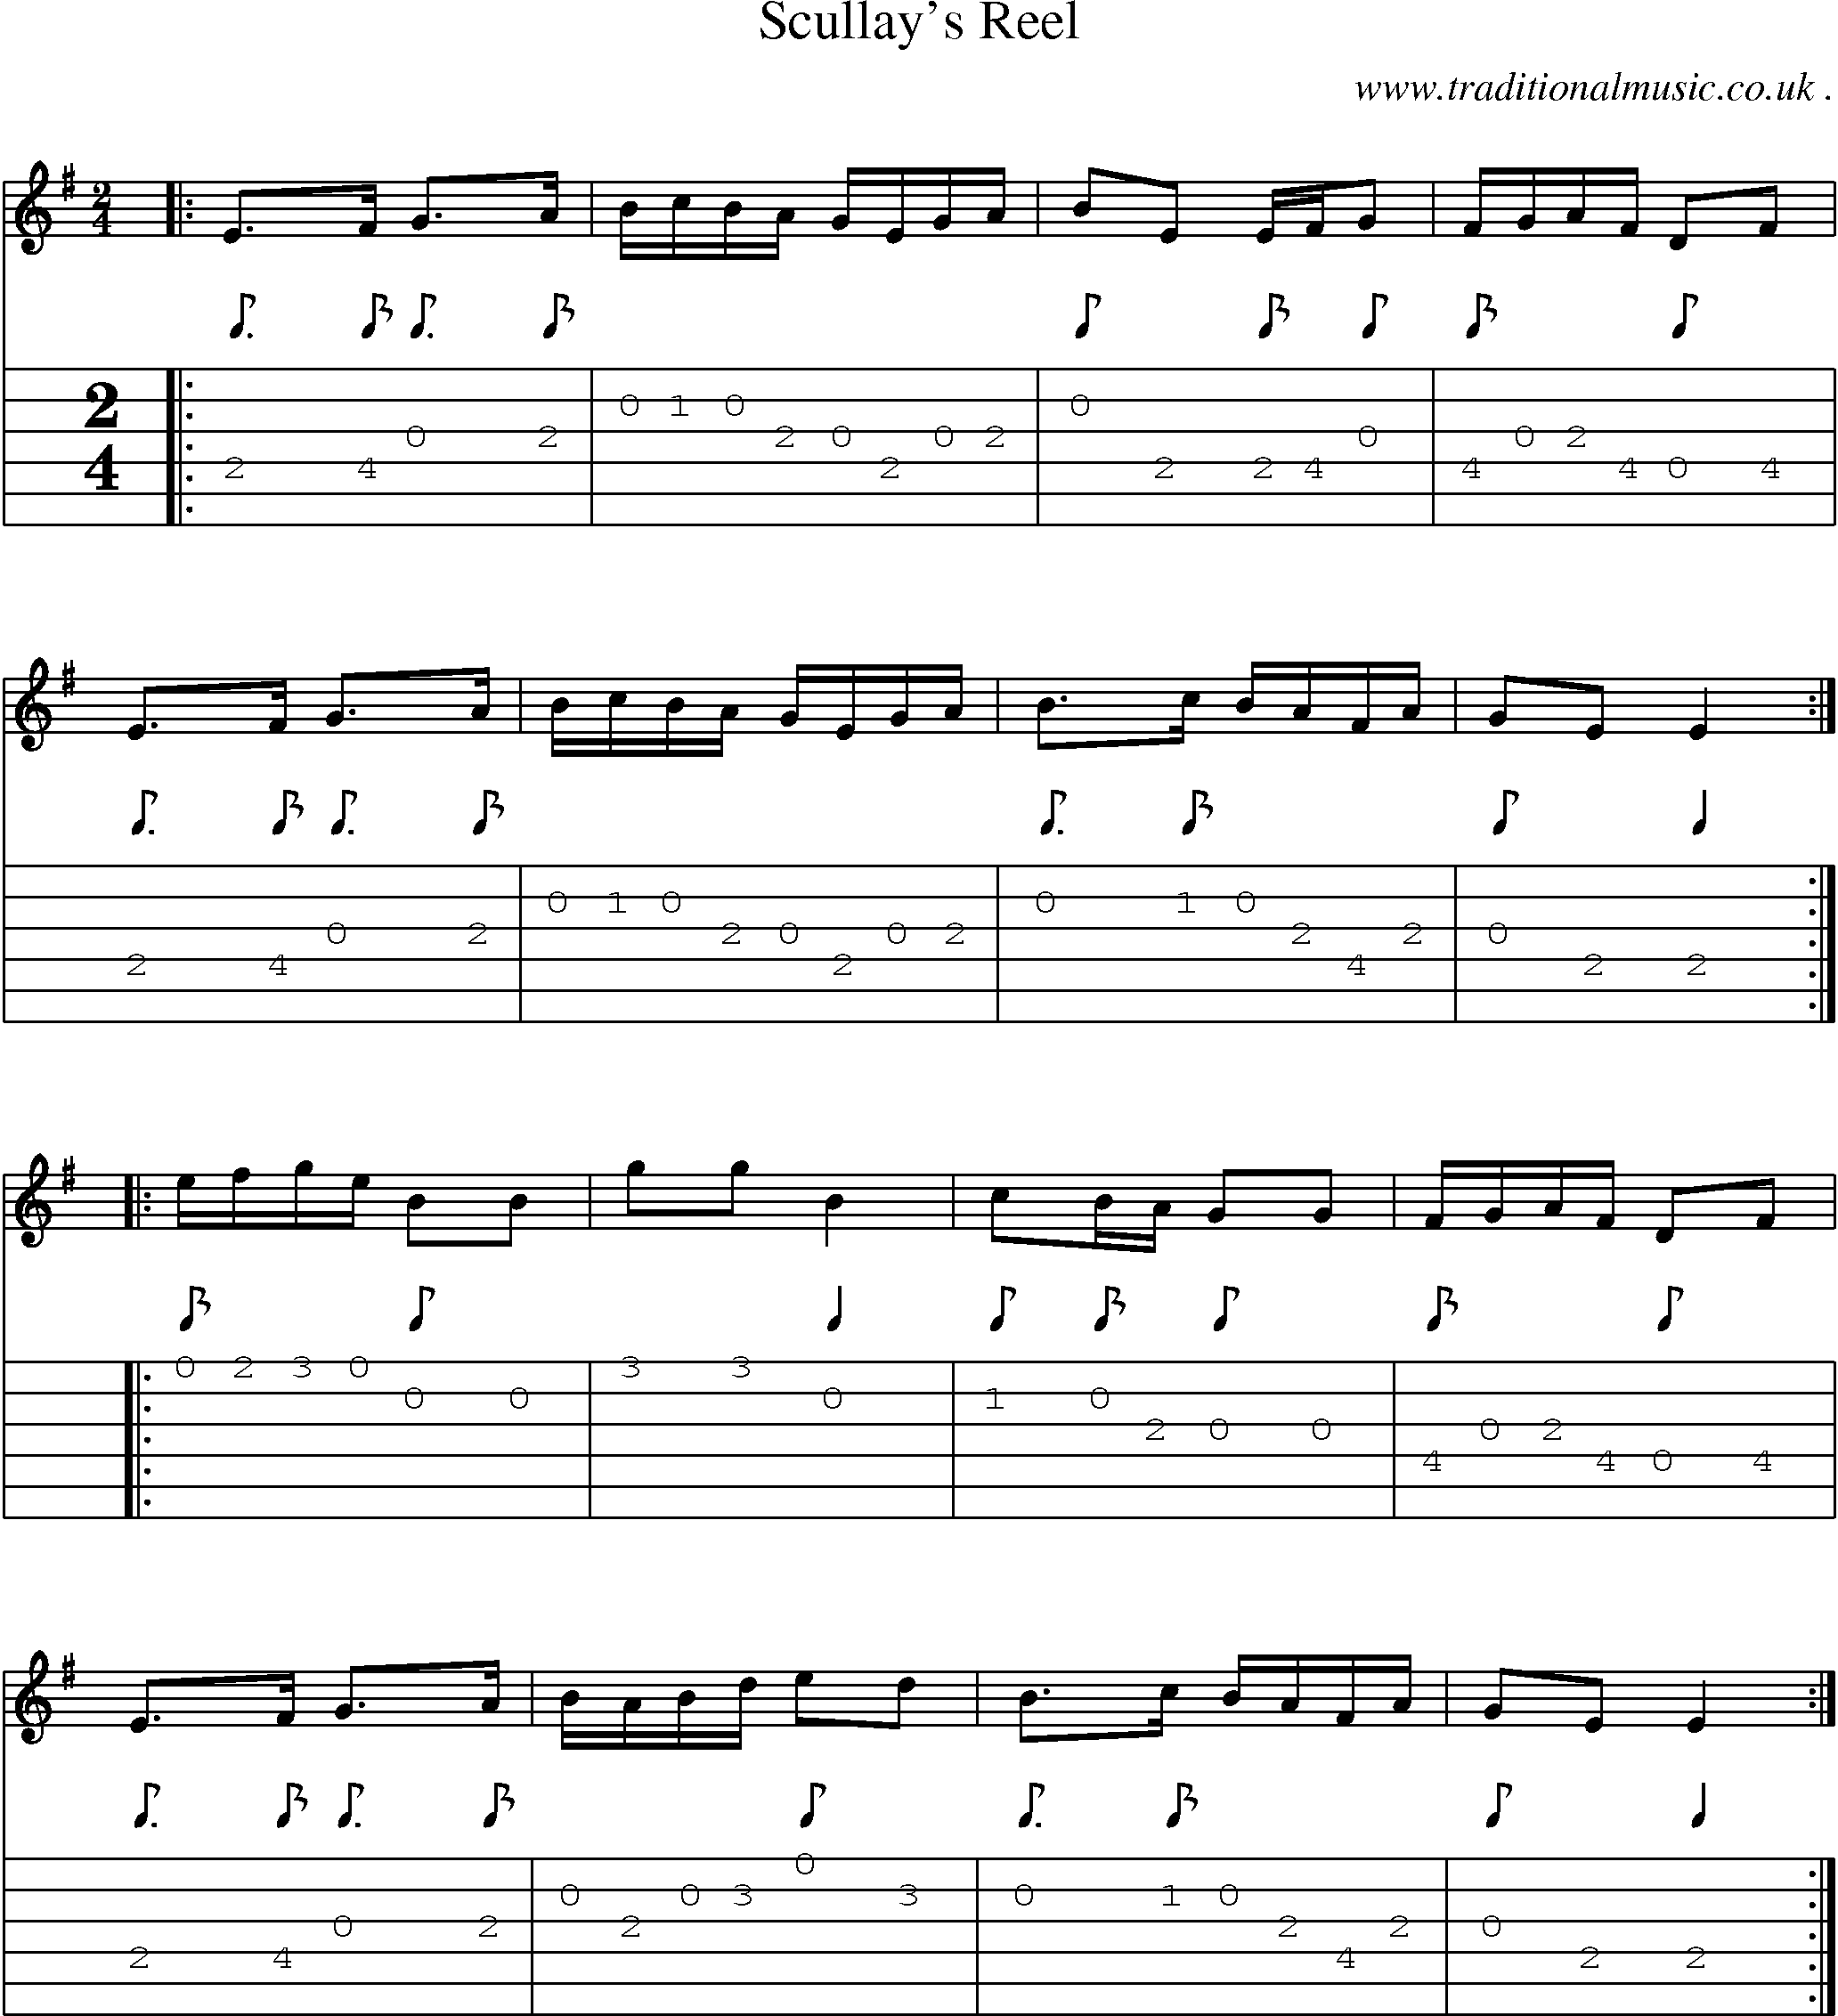 Music Score and Guitar Tabs for Scullays Reel